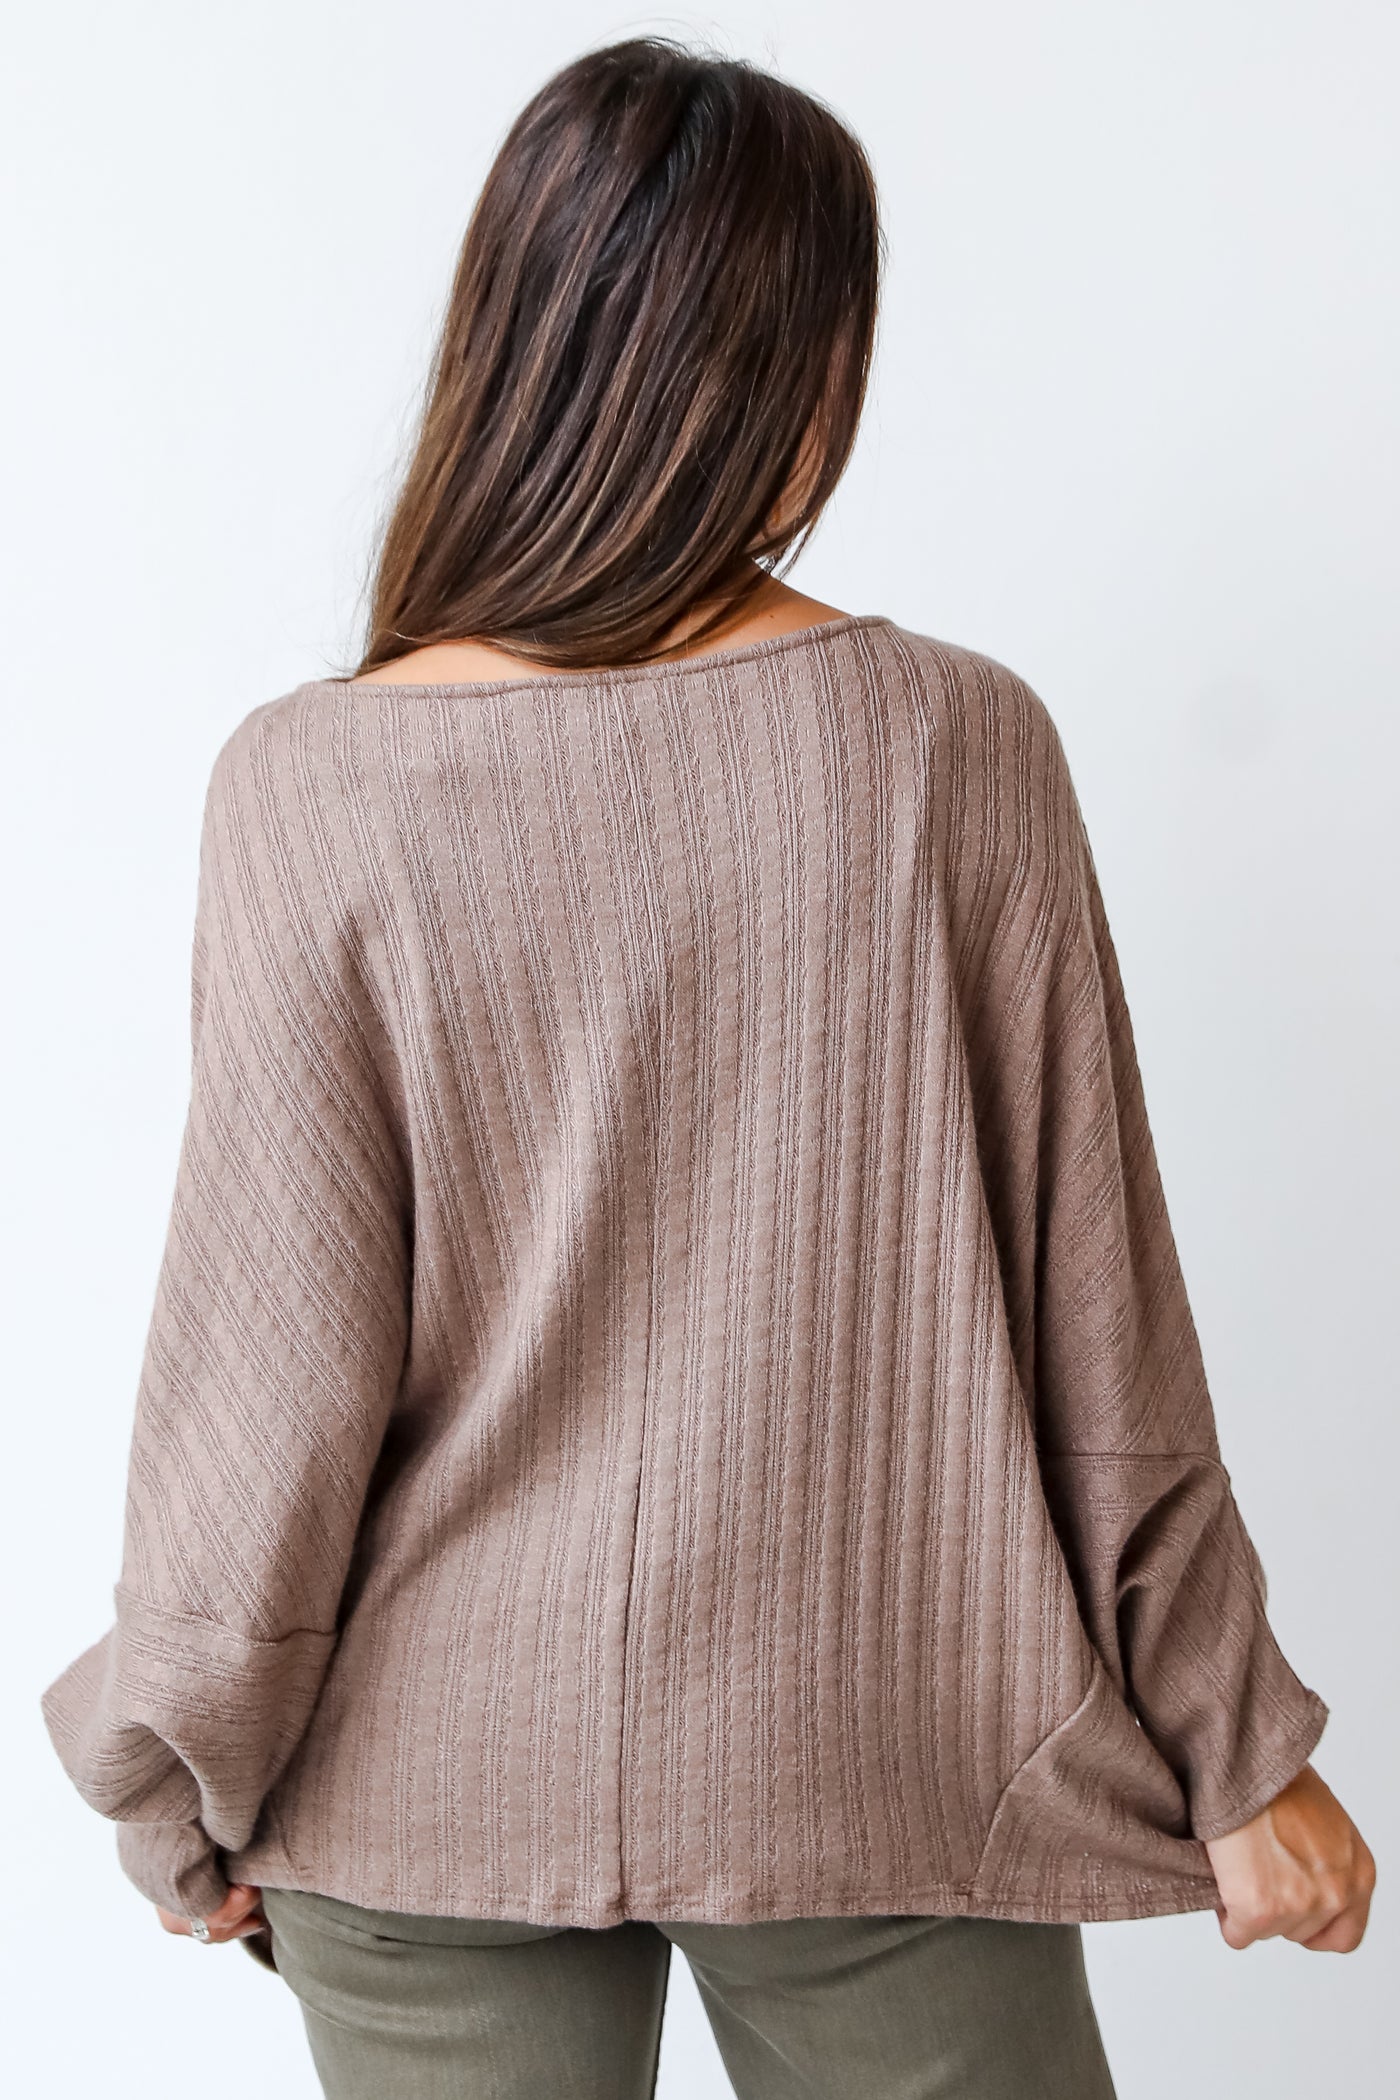 brown ribbed knit top back view